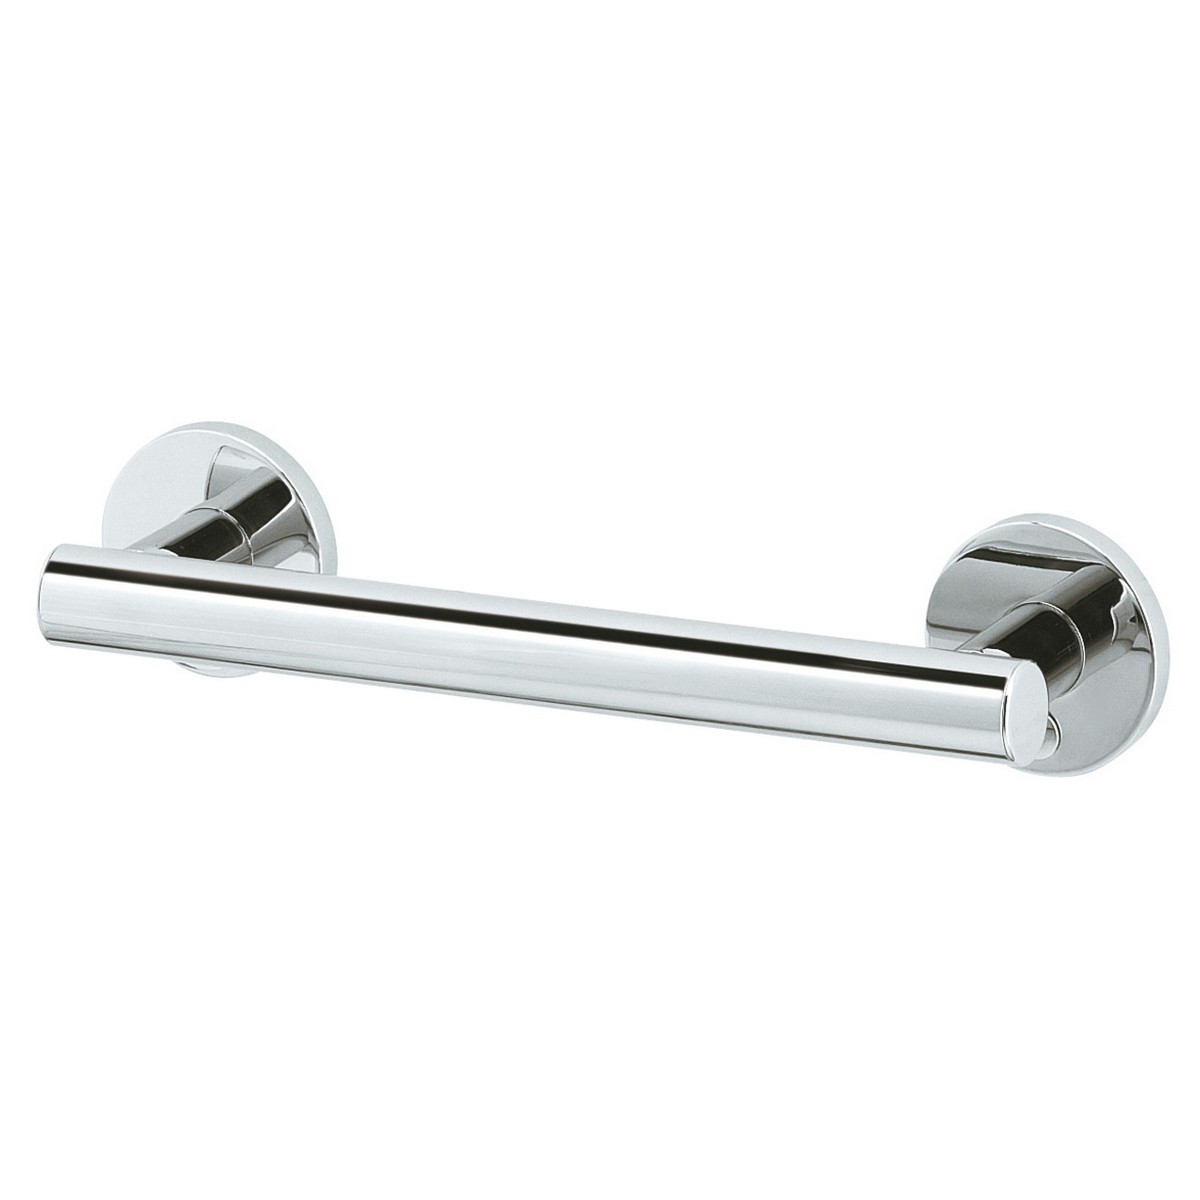 KEUCO 35901011600 PLAN CARE 16 INCH WALL MOUNTED SUPPORT RAIL IN POLISHED CHROME